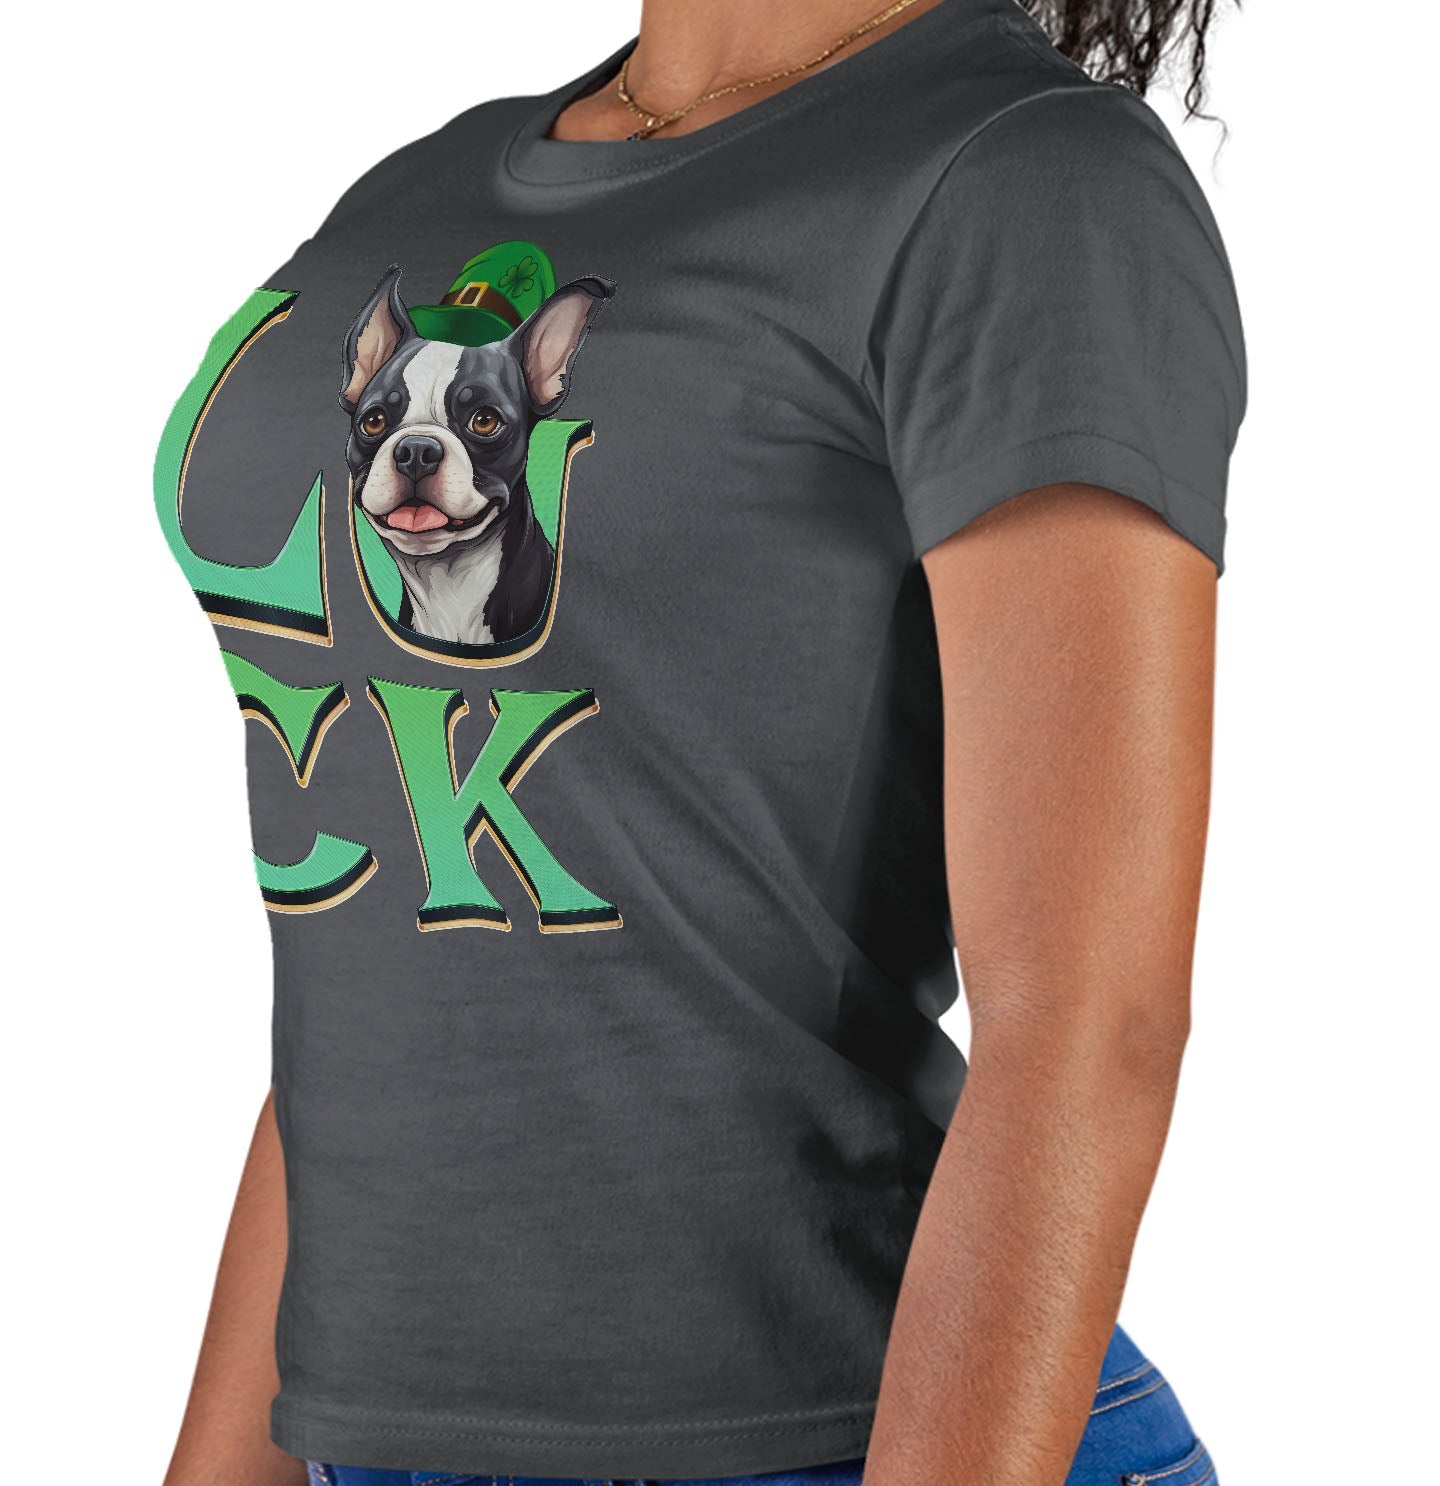 Big LUCK St. Patrick's Day Boston Terrier - Women's Fitted T-Shirt